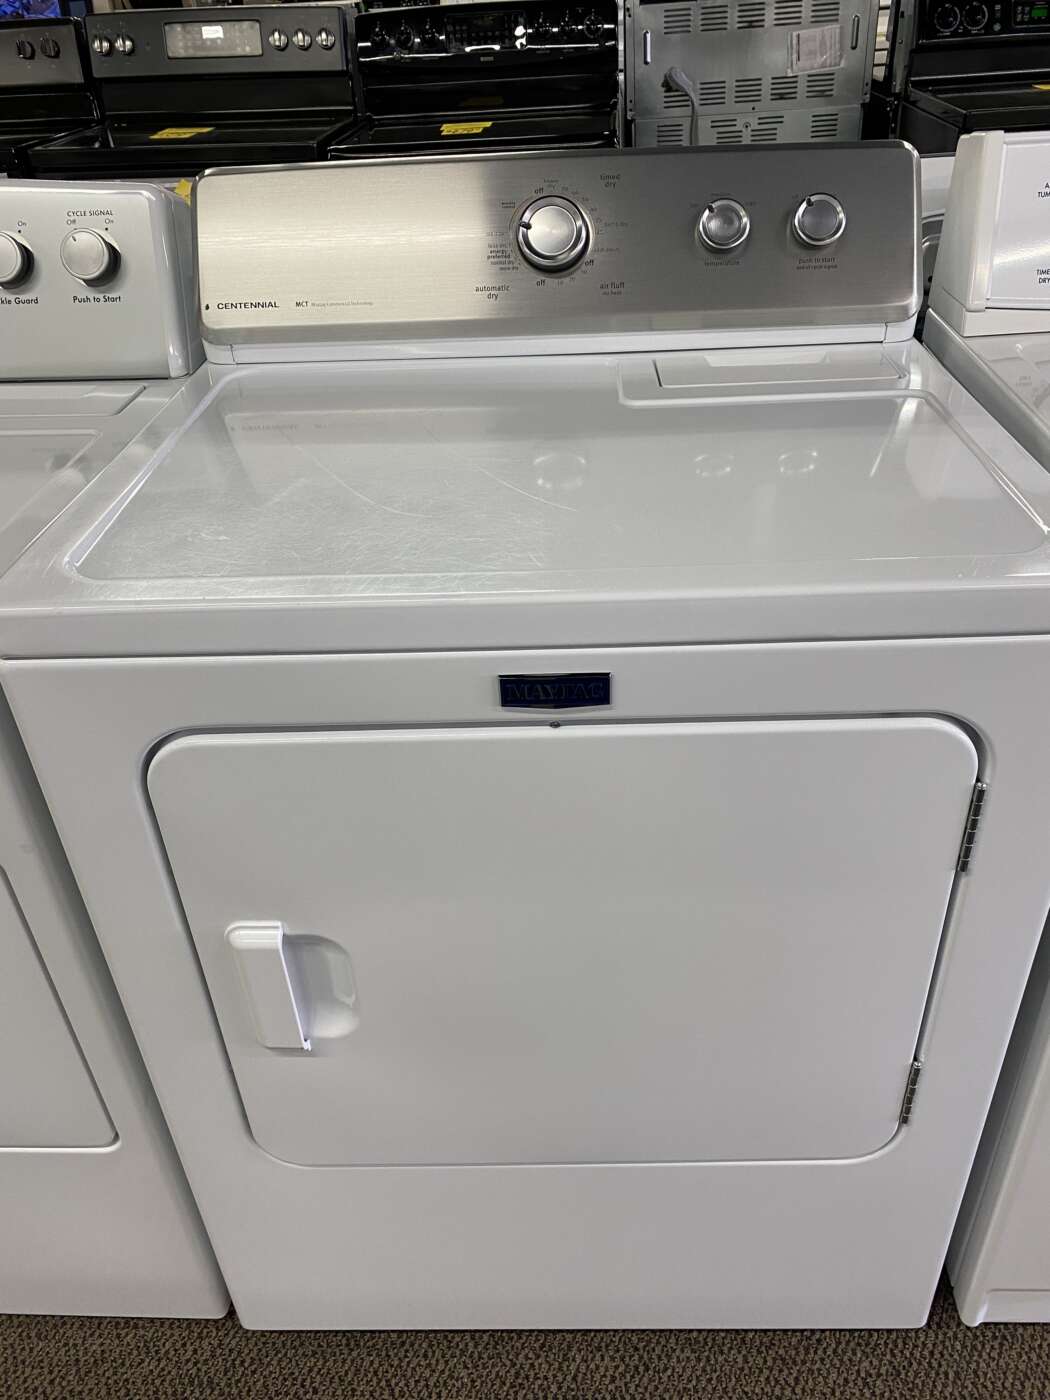 Reconditioned MAYTAG 7.0 Cu. Ft. Electric Dryer – White